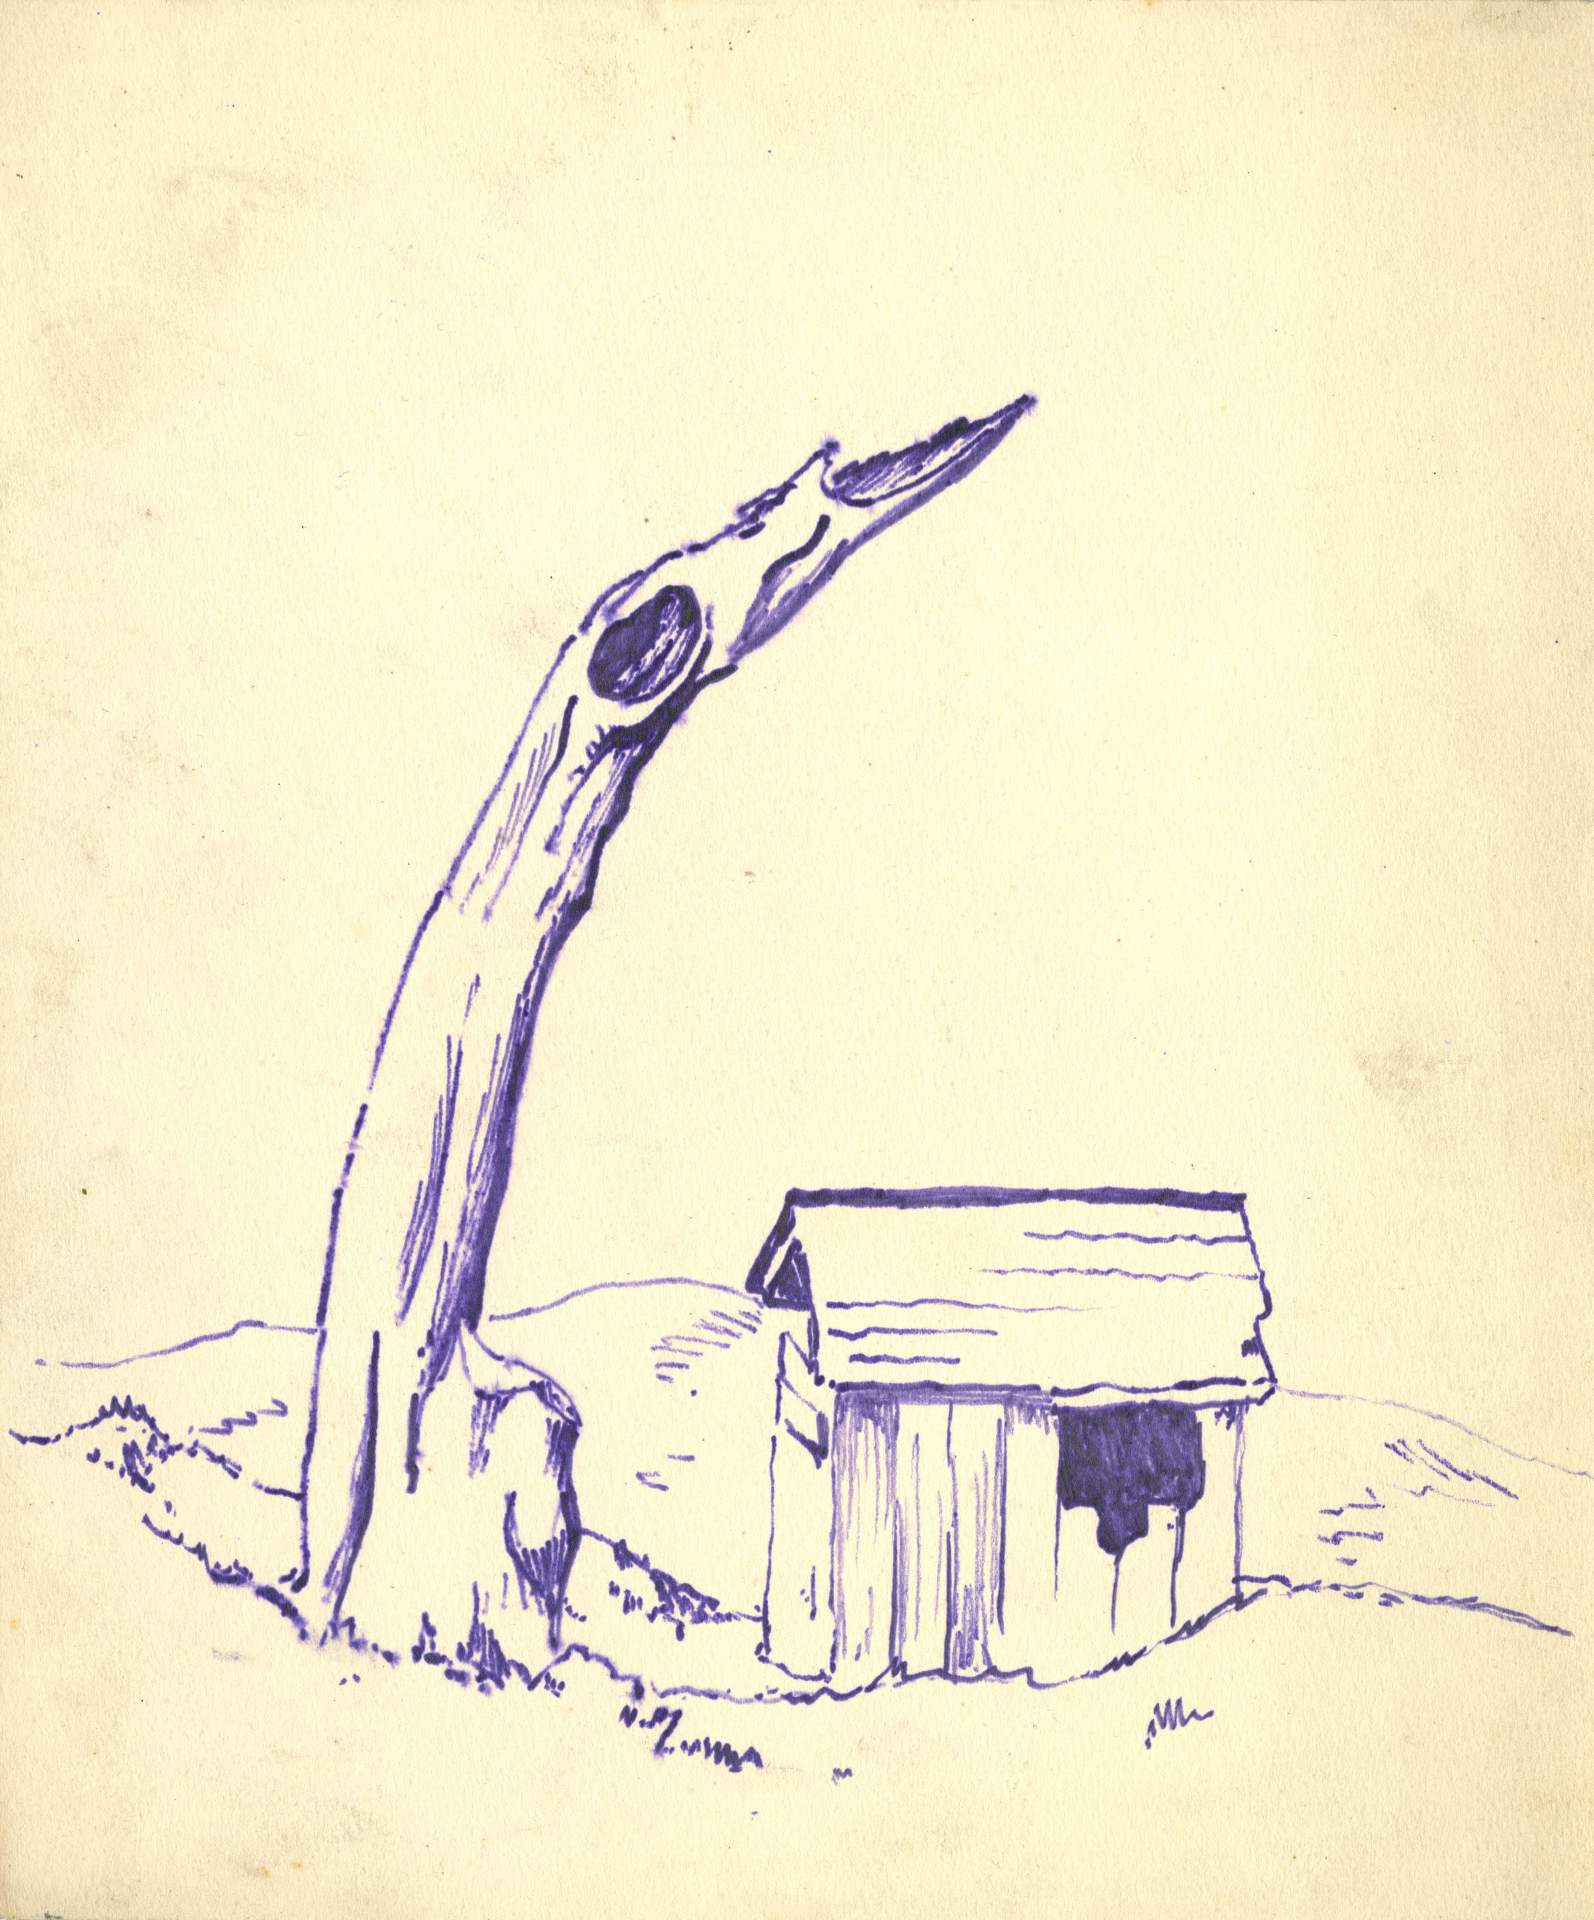 Untitled (Tilting tree and shed)